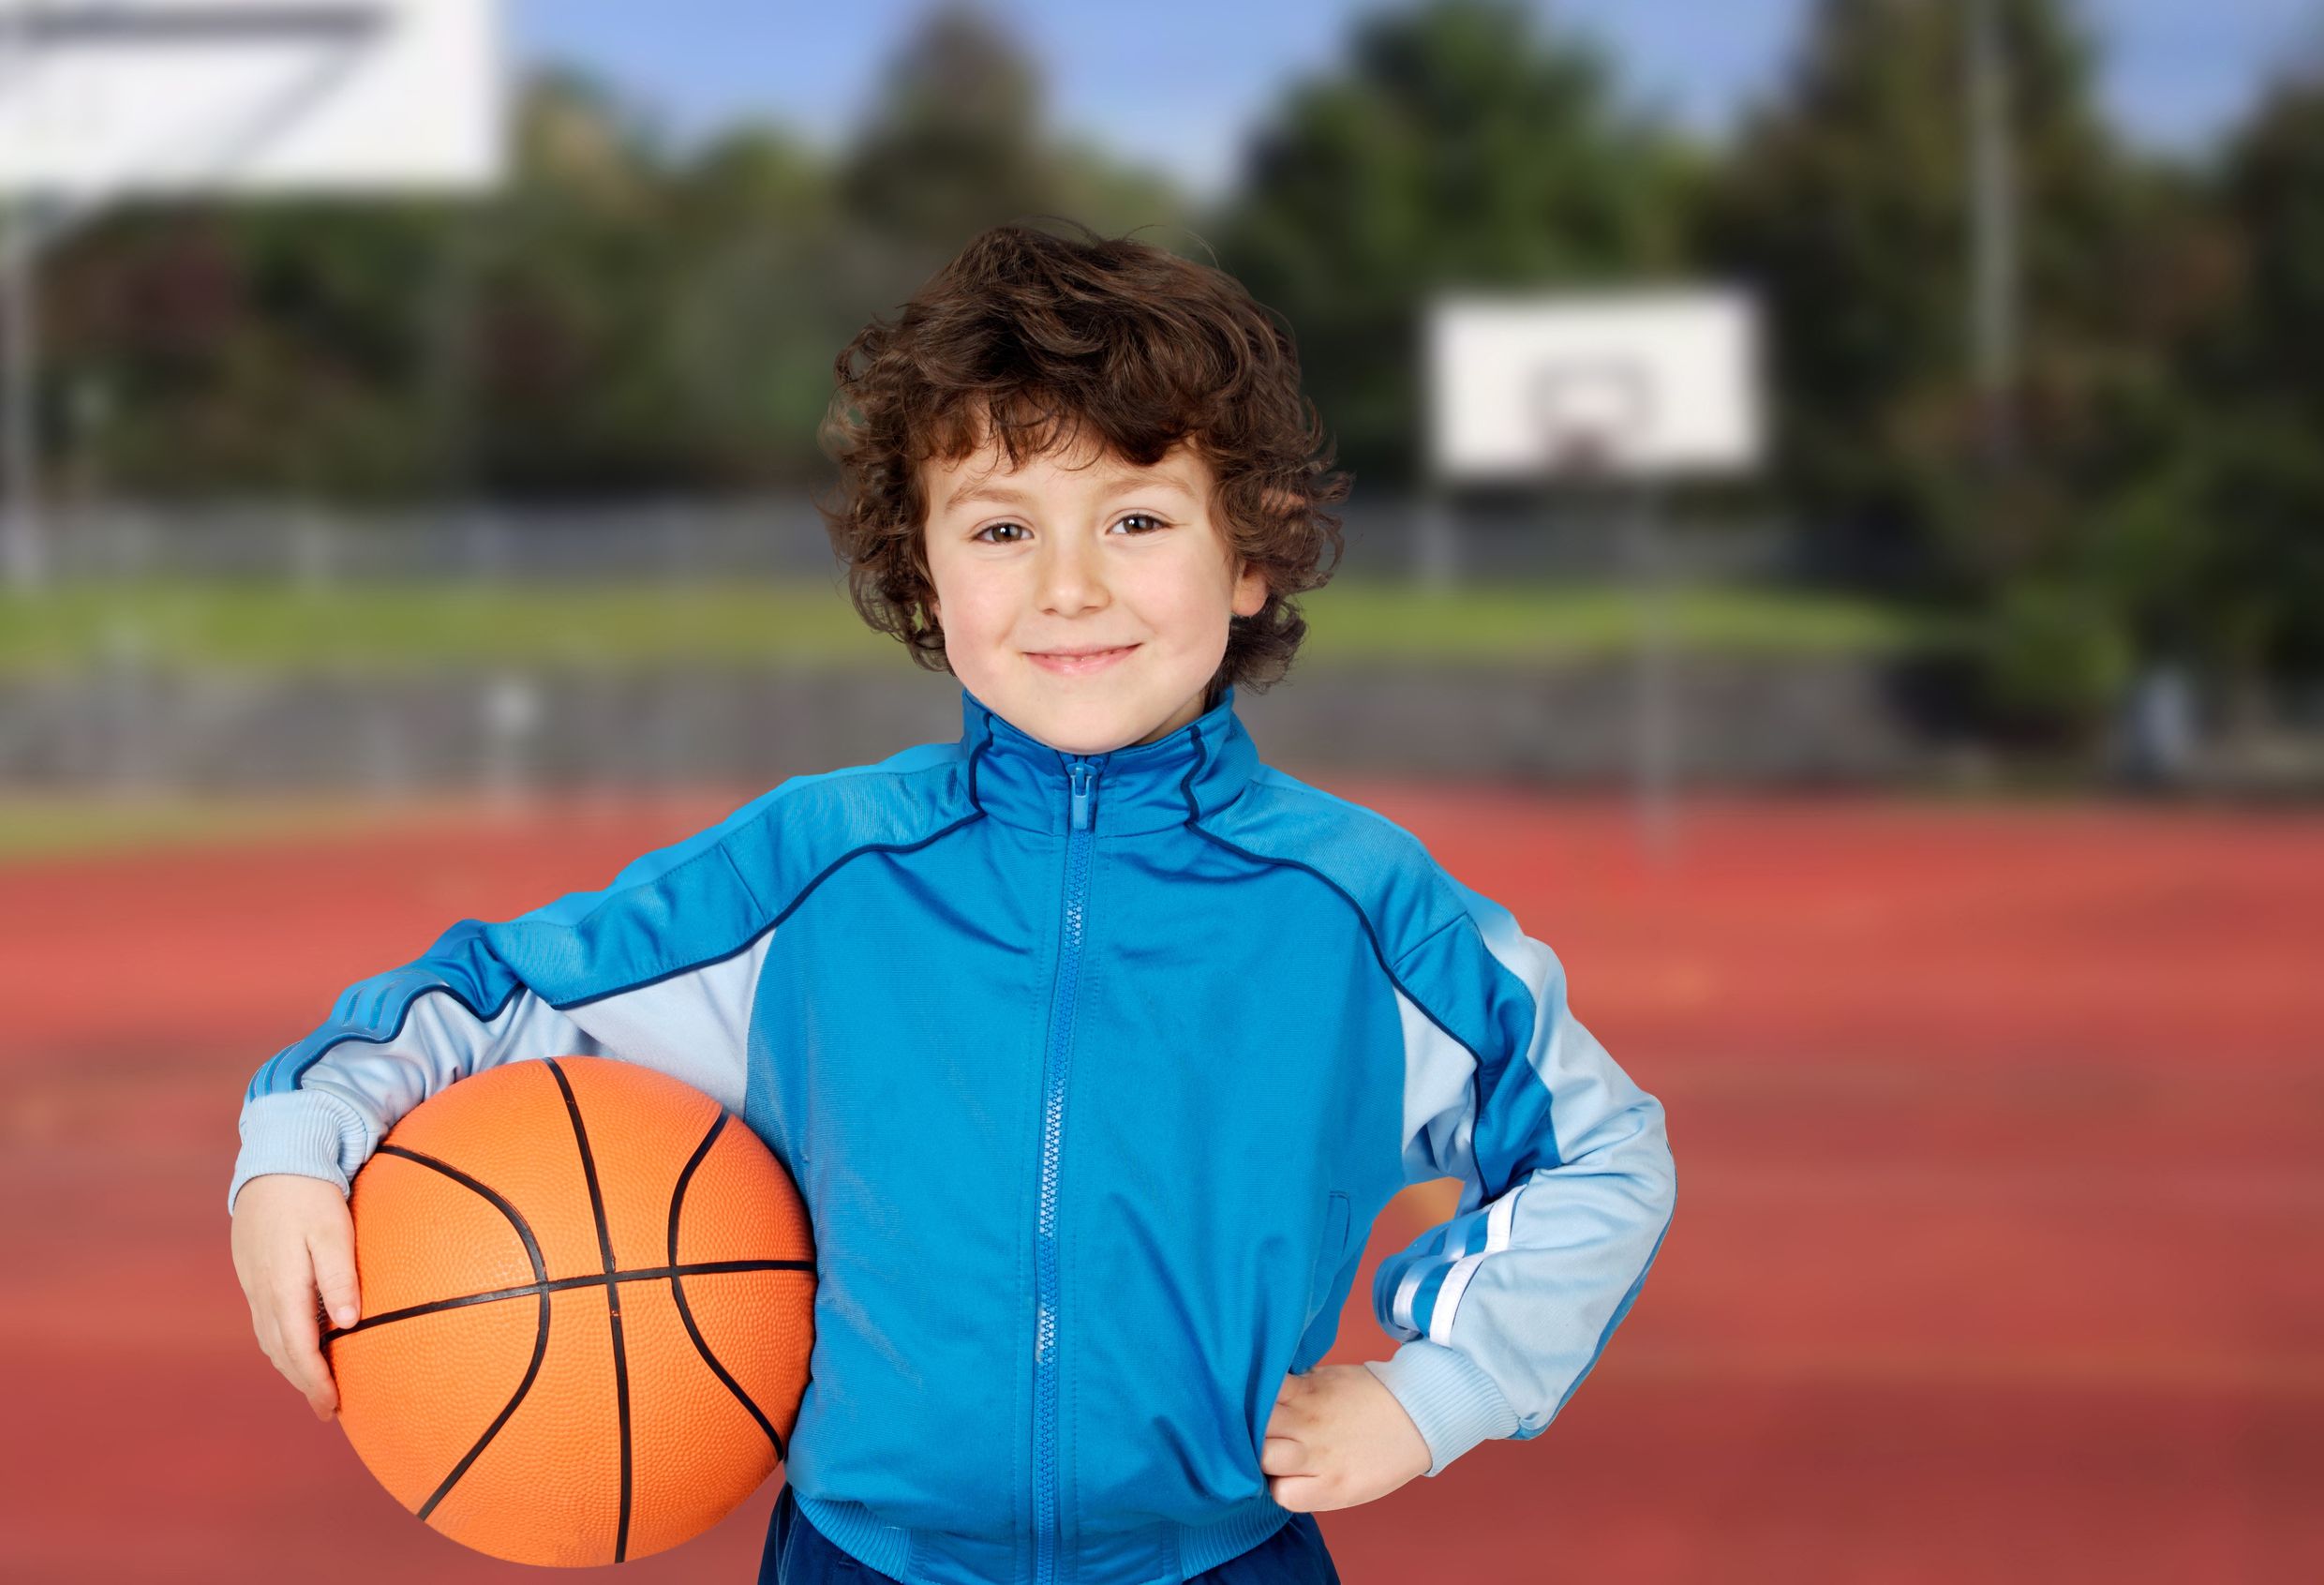 Little boy with basketball